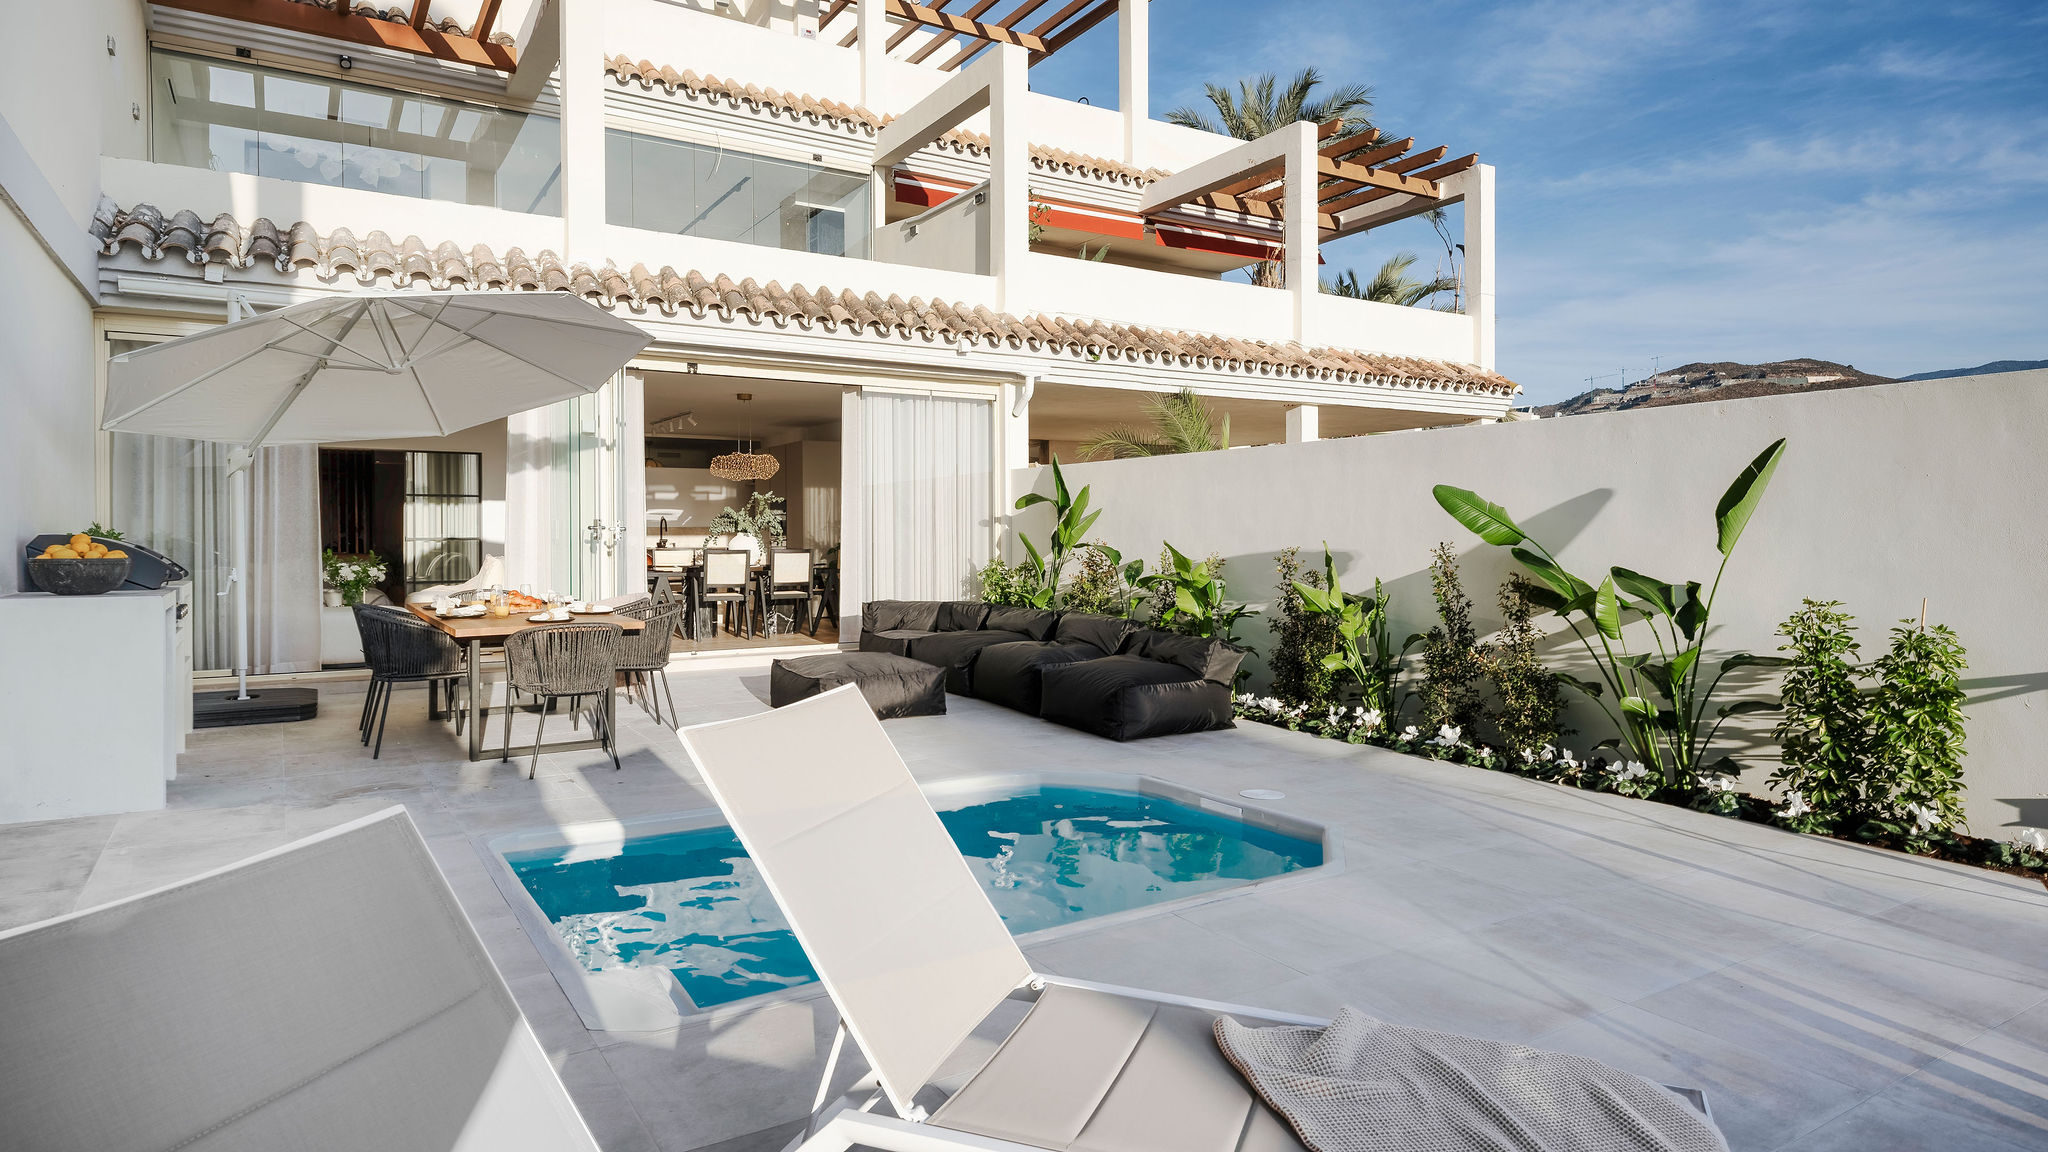 Luxurious Four-Bedroom Apartment with Private Pool and Garden in Nueva Andalucia: Modern Parisian Haven for Sale"